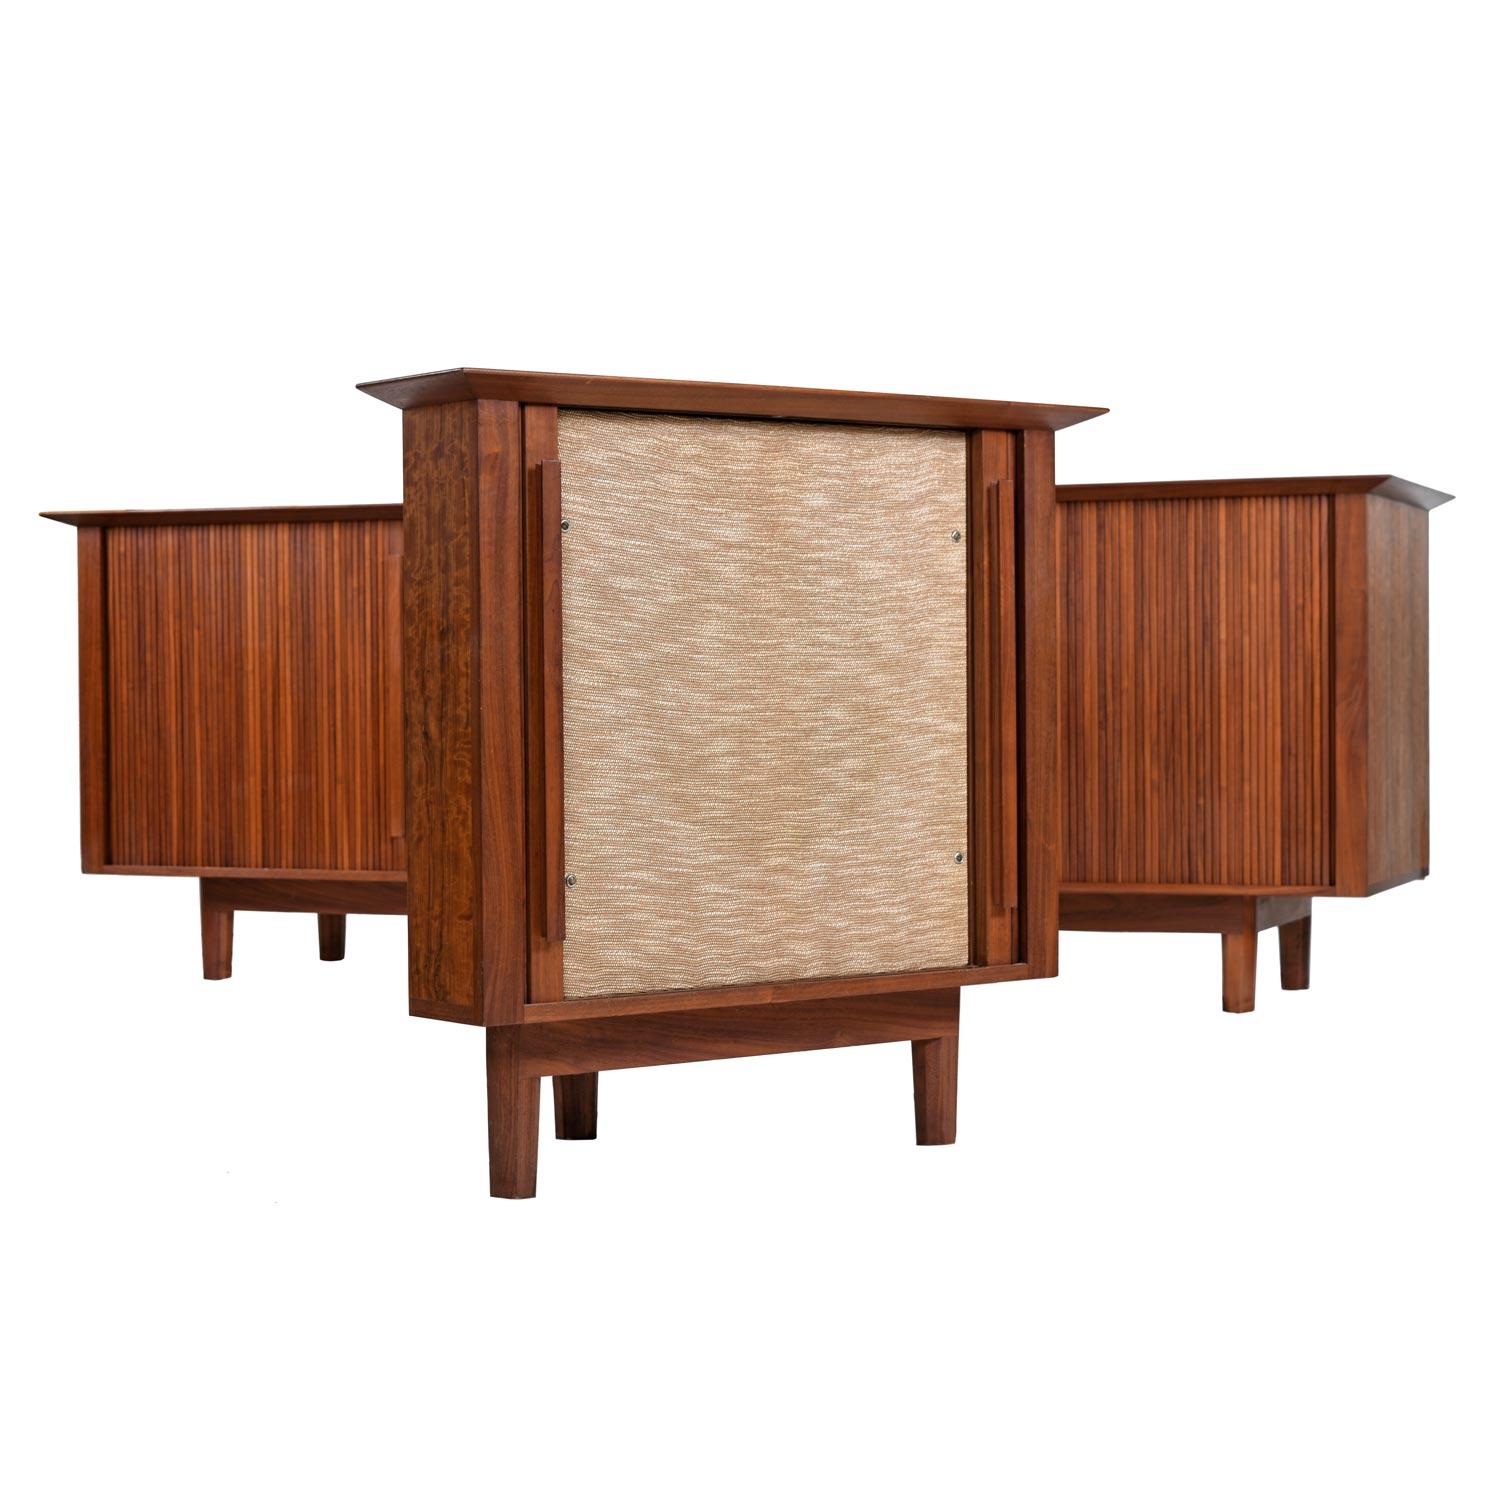 First, let's talk about these awesome cabinets, then we'll move on to the professionally restored, Original audio components and incredible sound.  Please believe me when I say pictures don't do these pieces justice. The mahogany (possibly Mindoro)